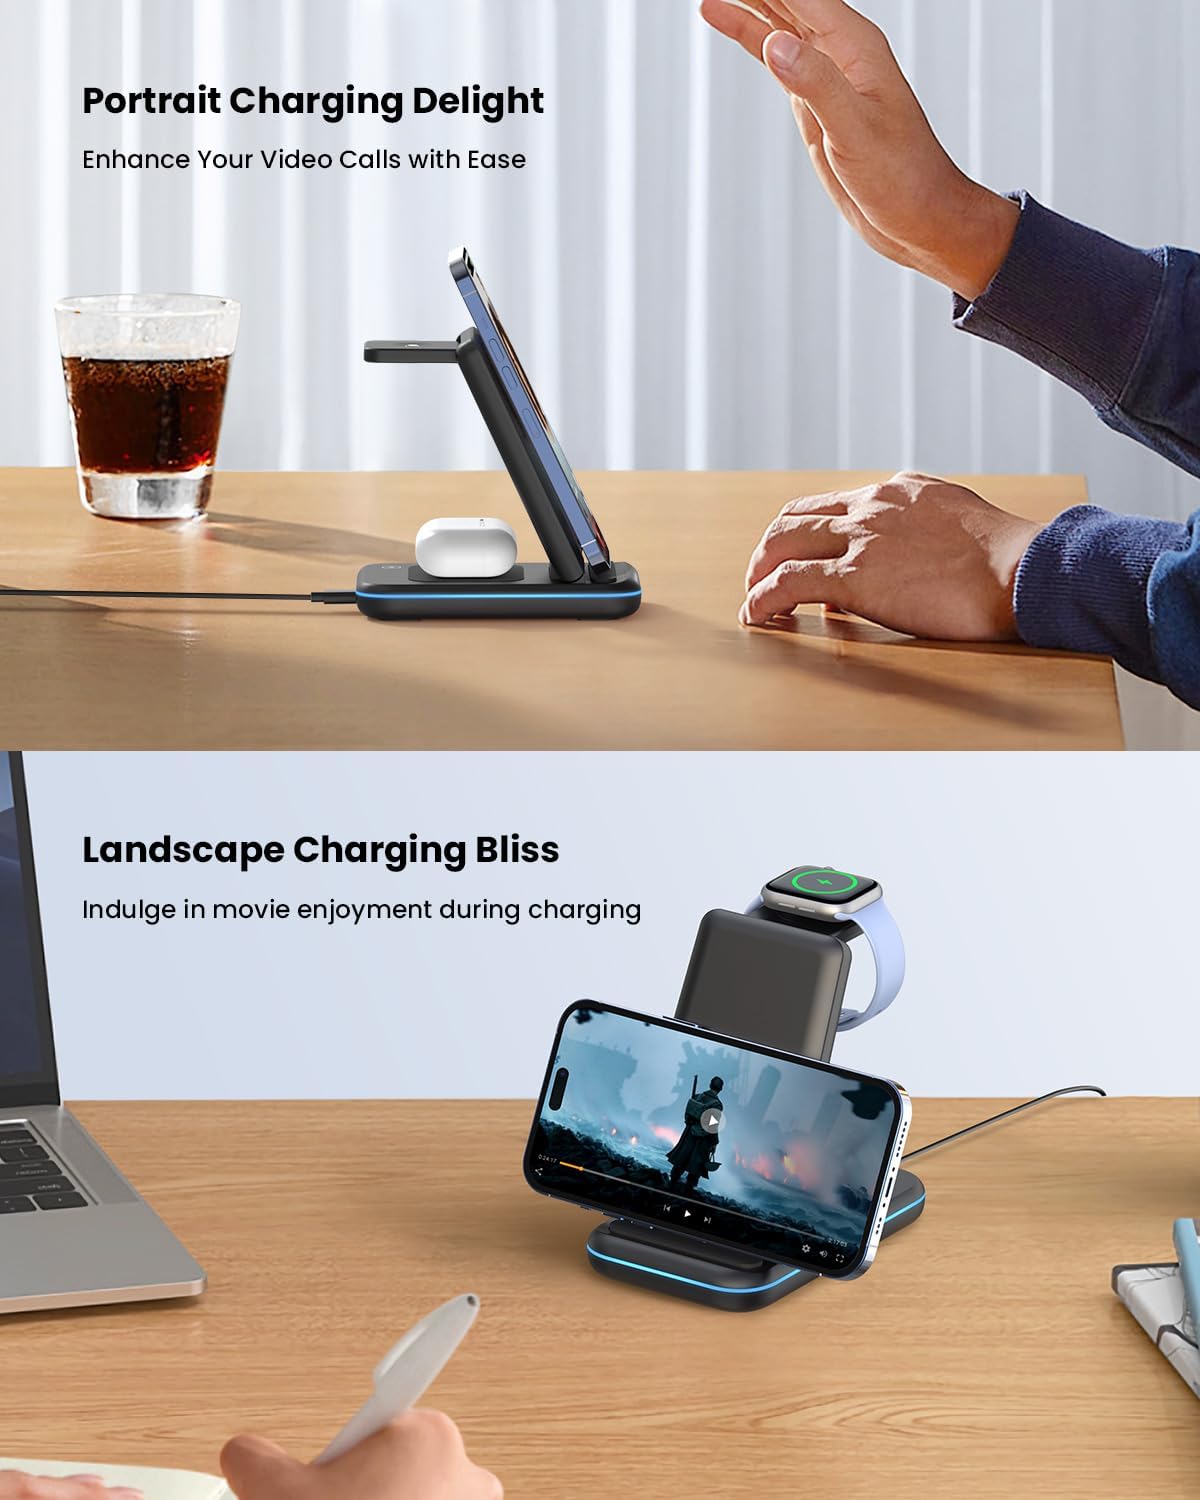 Wireless Charging Station - GEEKERA 3 in 1 Foldable Wireless Charger Stand for iPhone